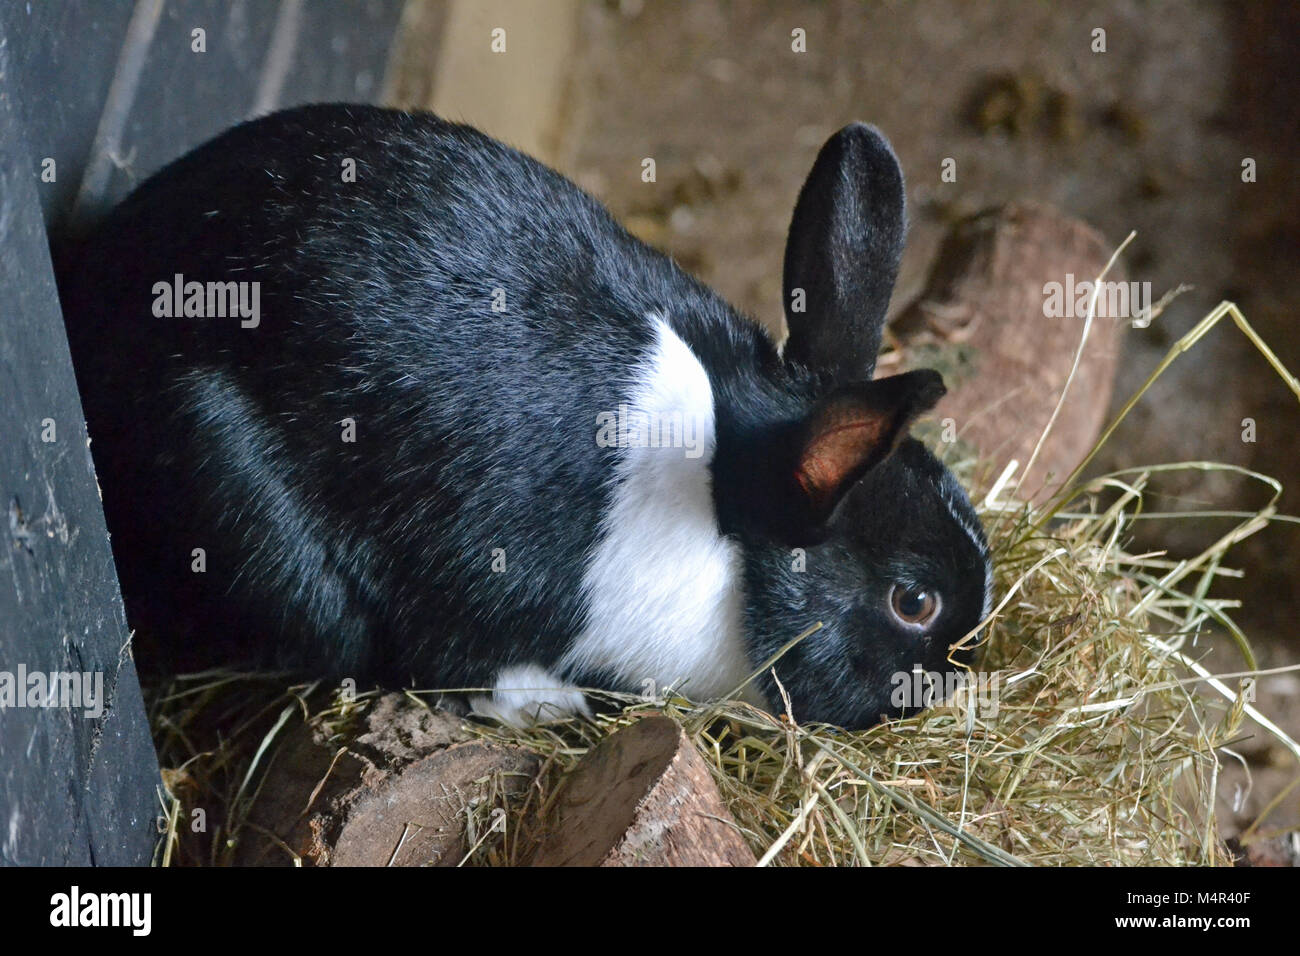 Black and white rabbit eating hay at Whipsnade Zoo Stock Photo